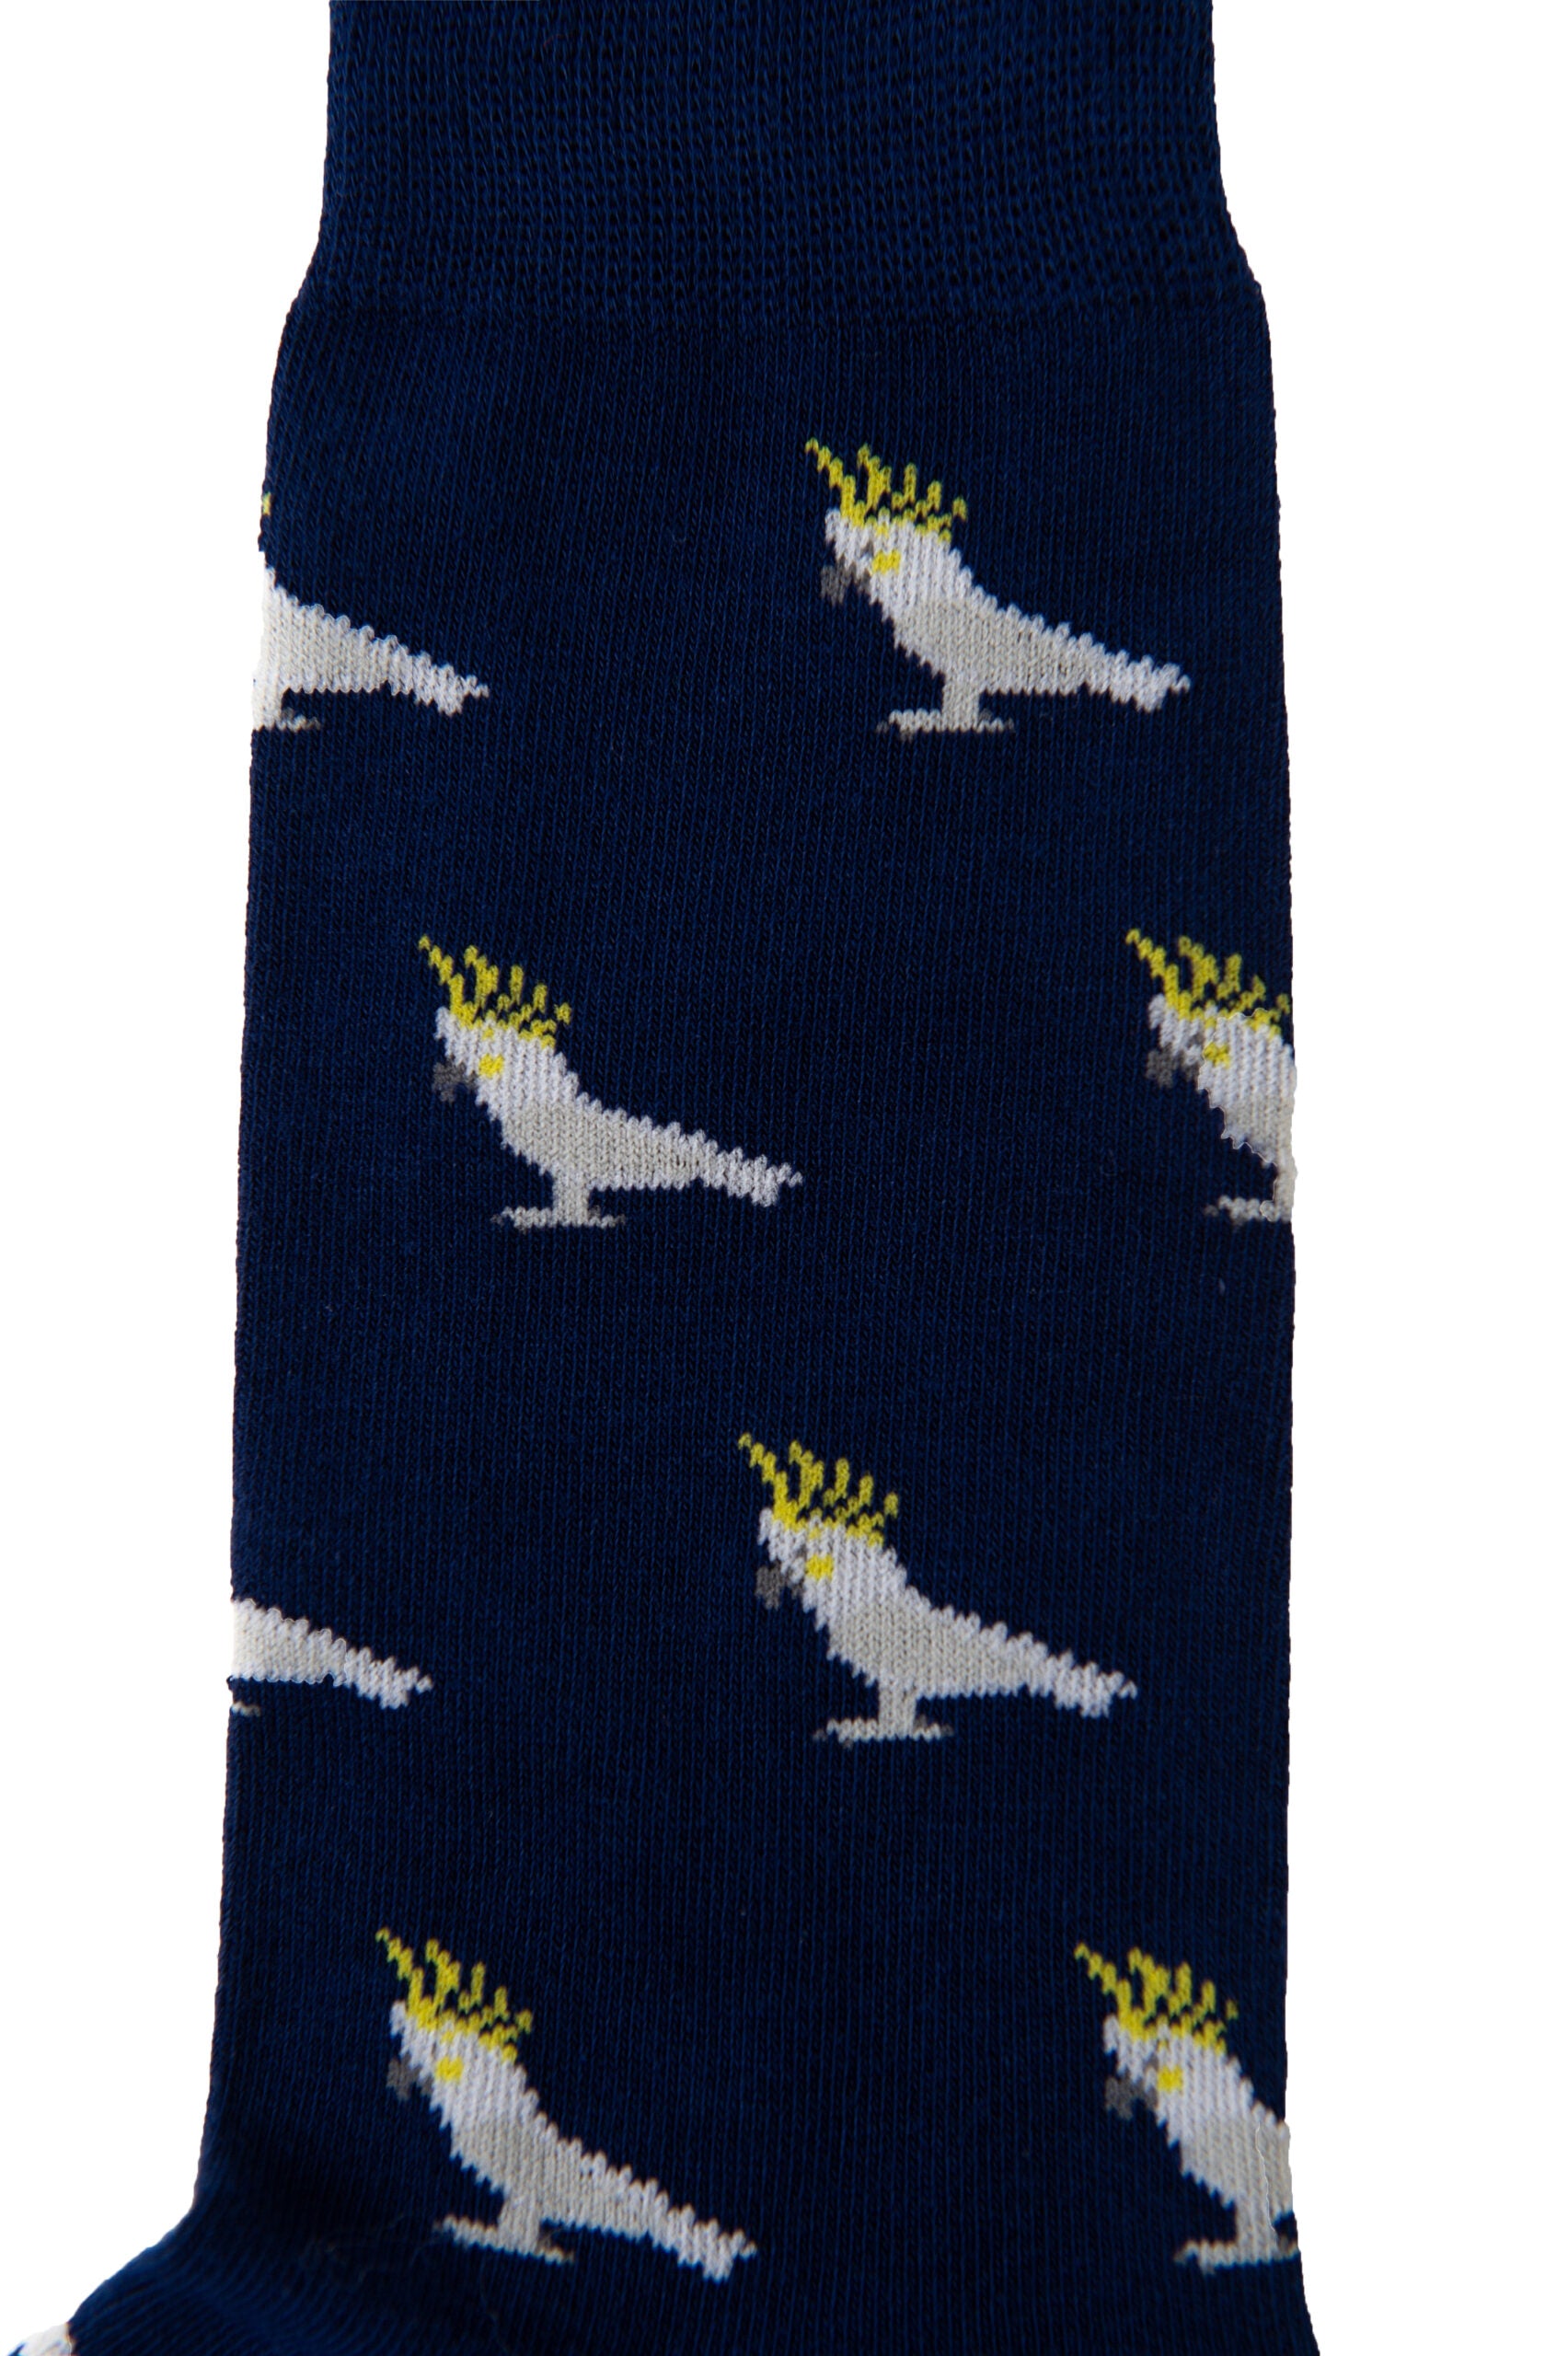 A blue and white Cockatoo Sock with white birds on it.